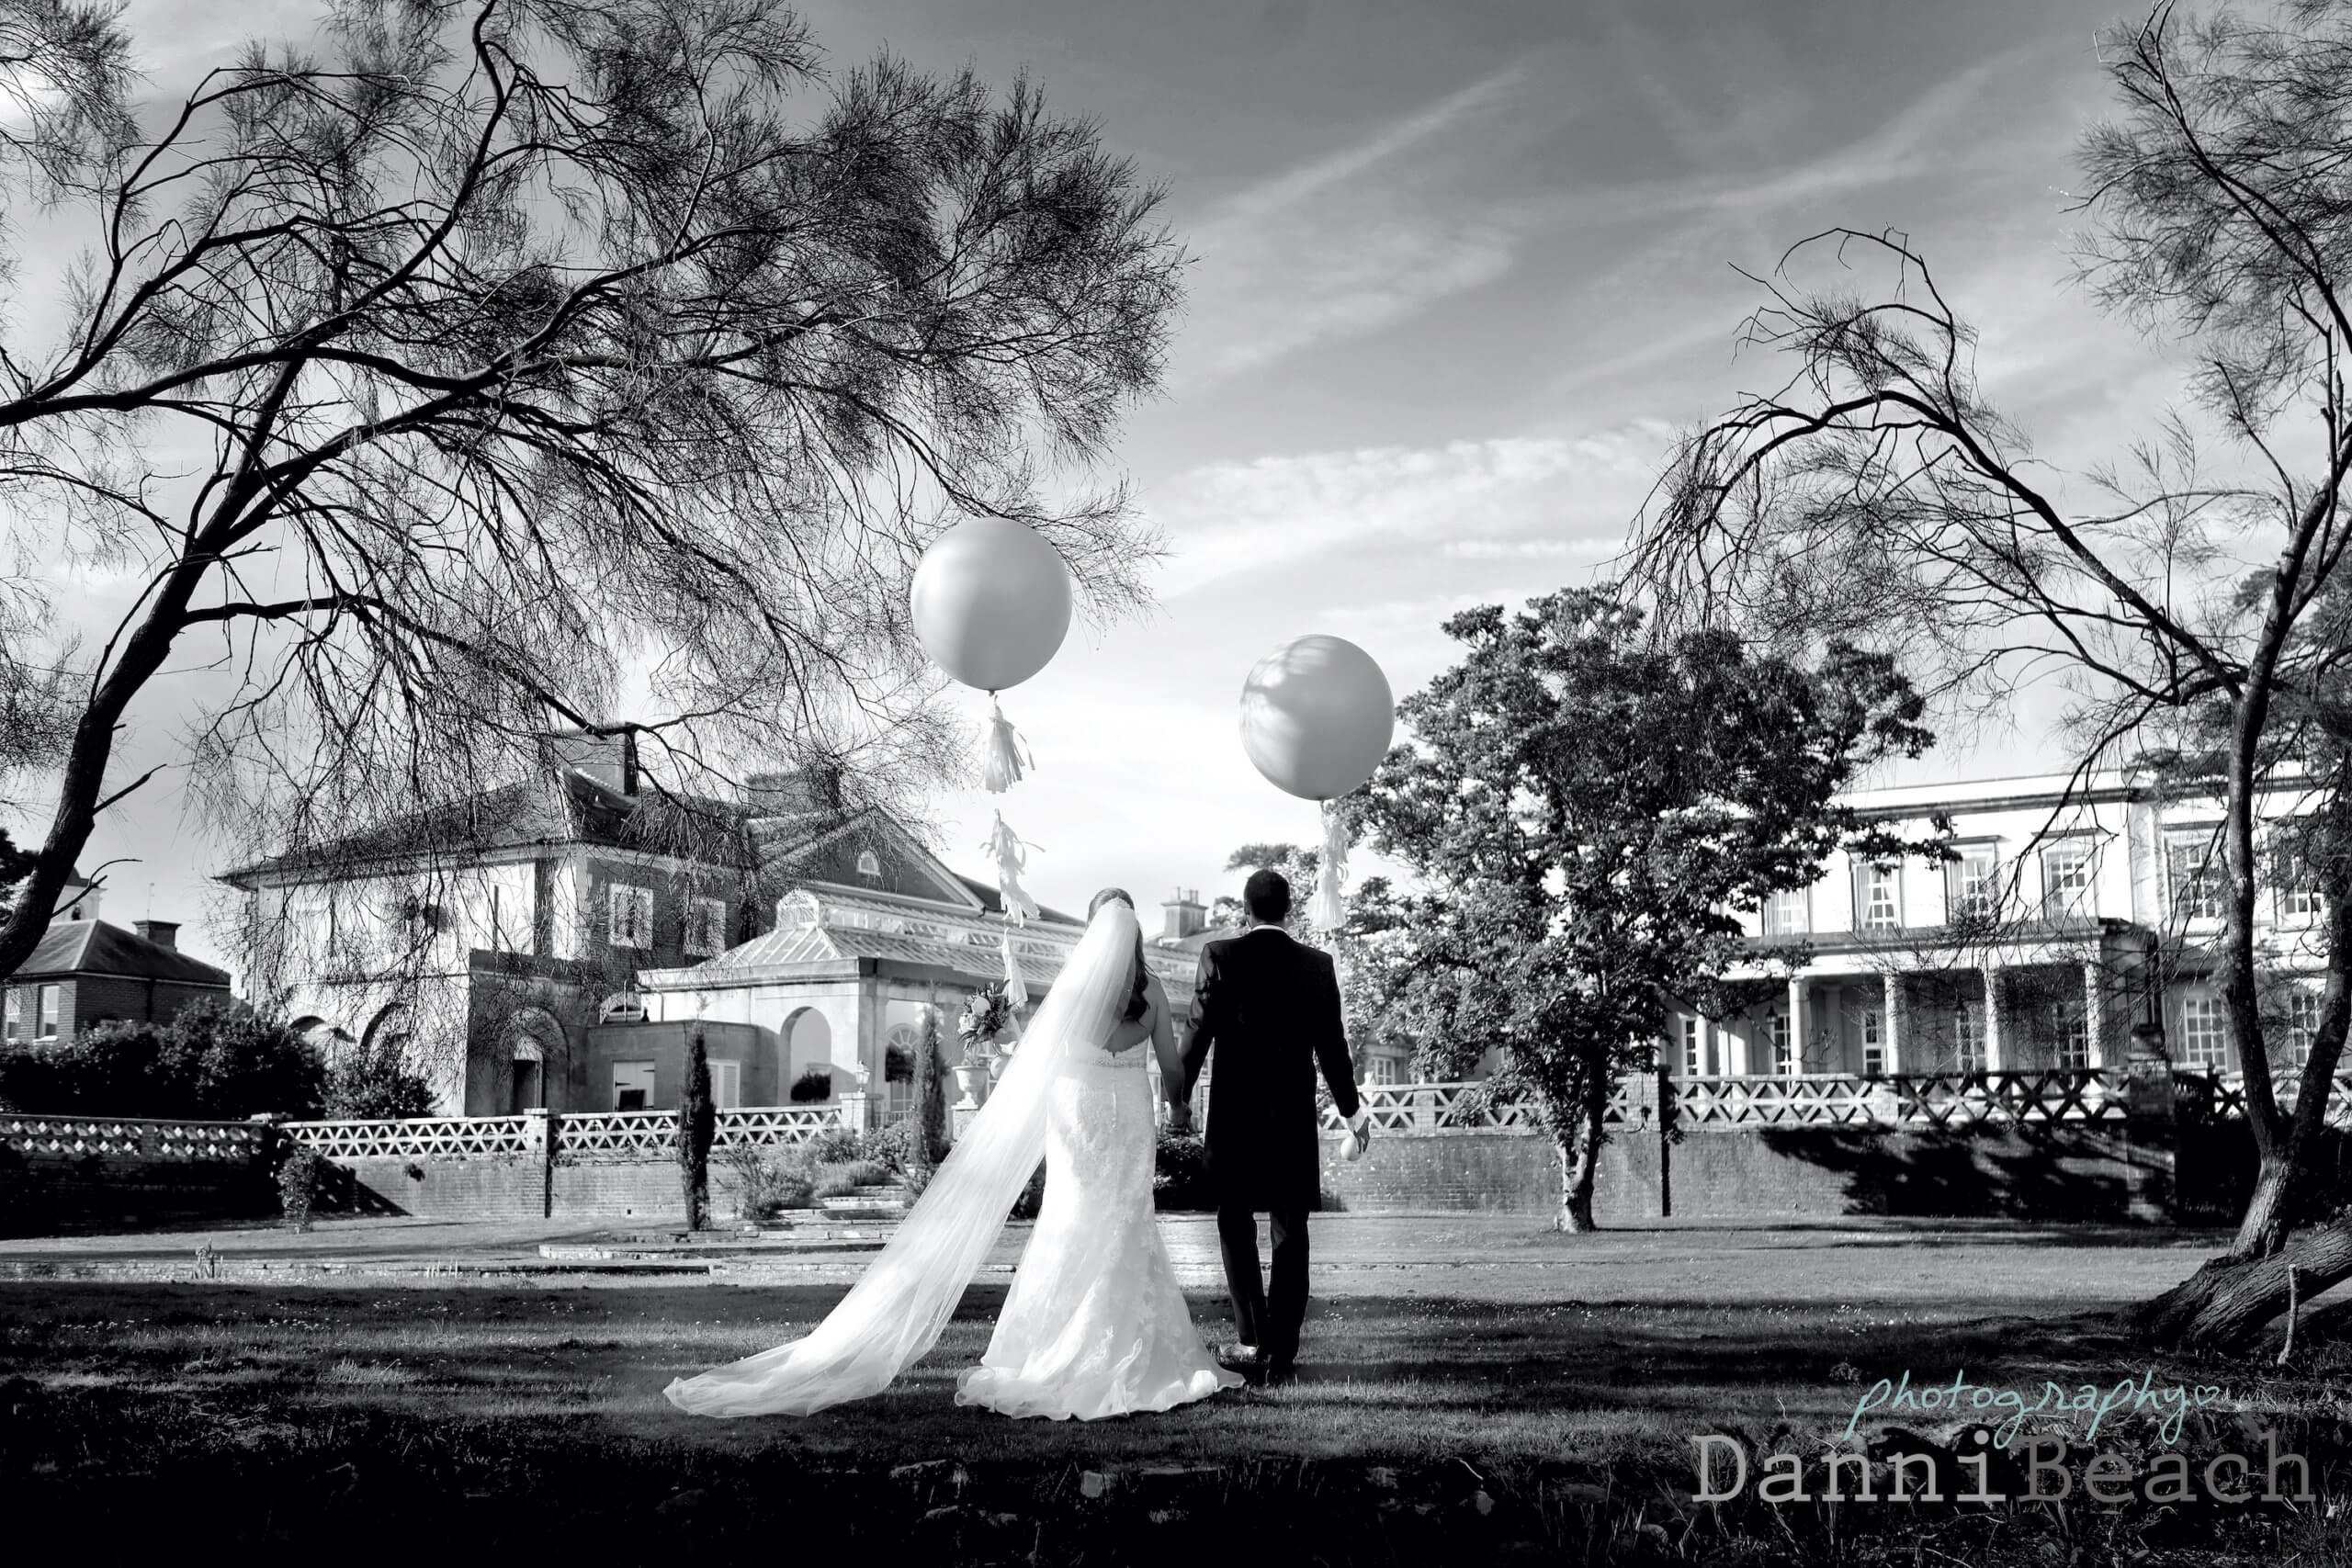 Balloons on your wedding day